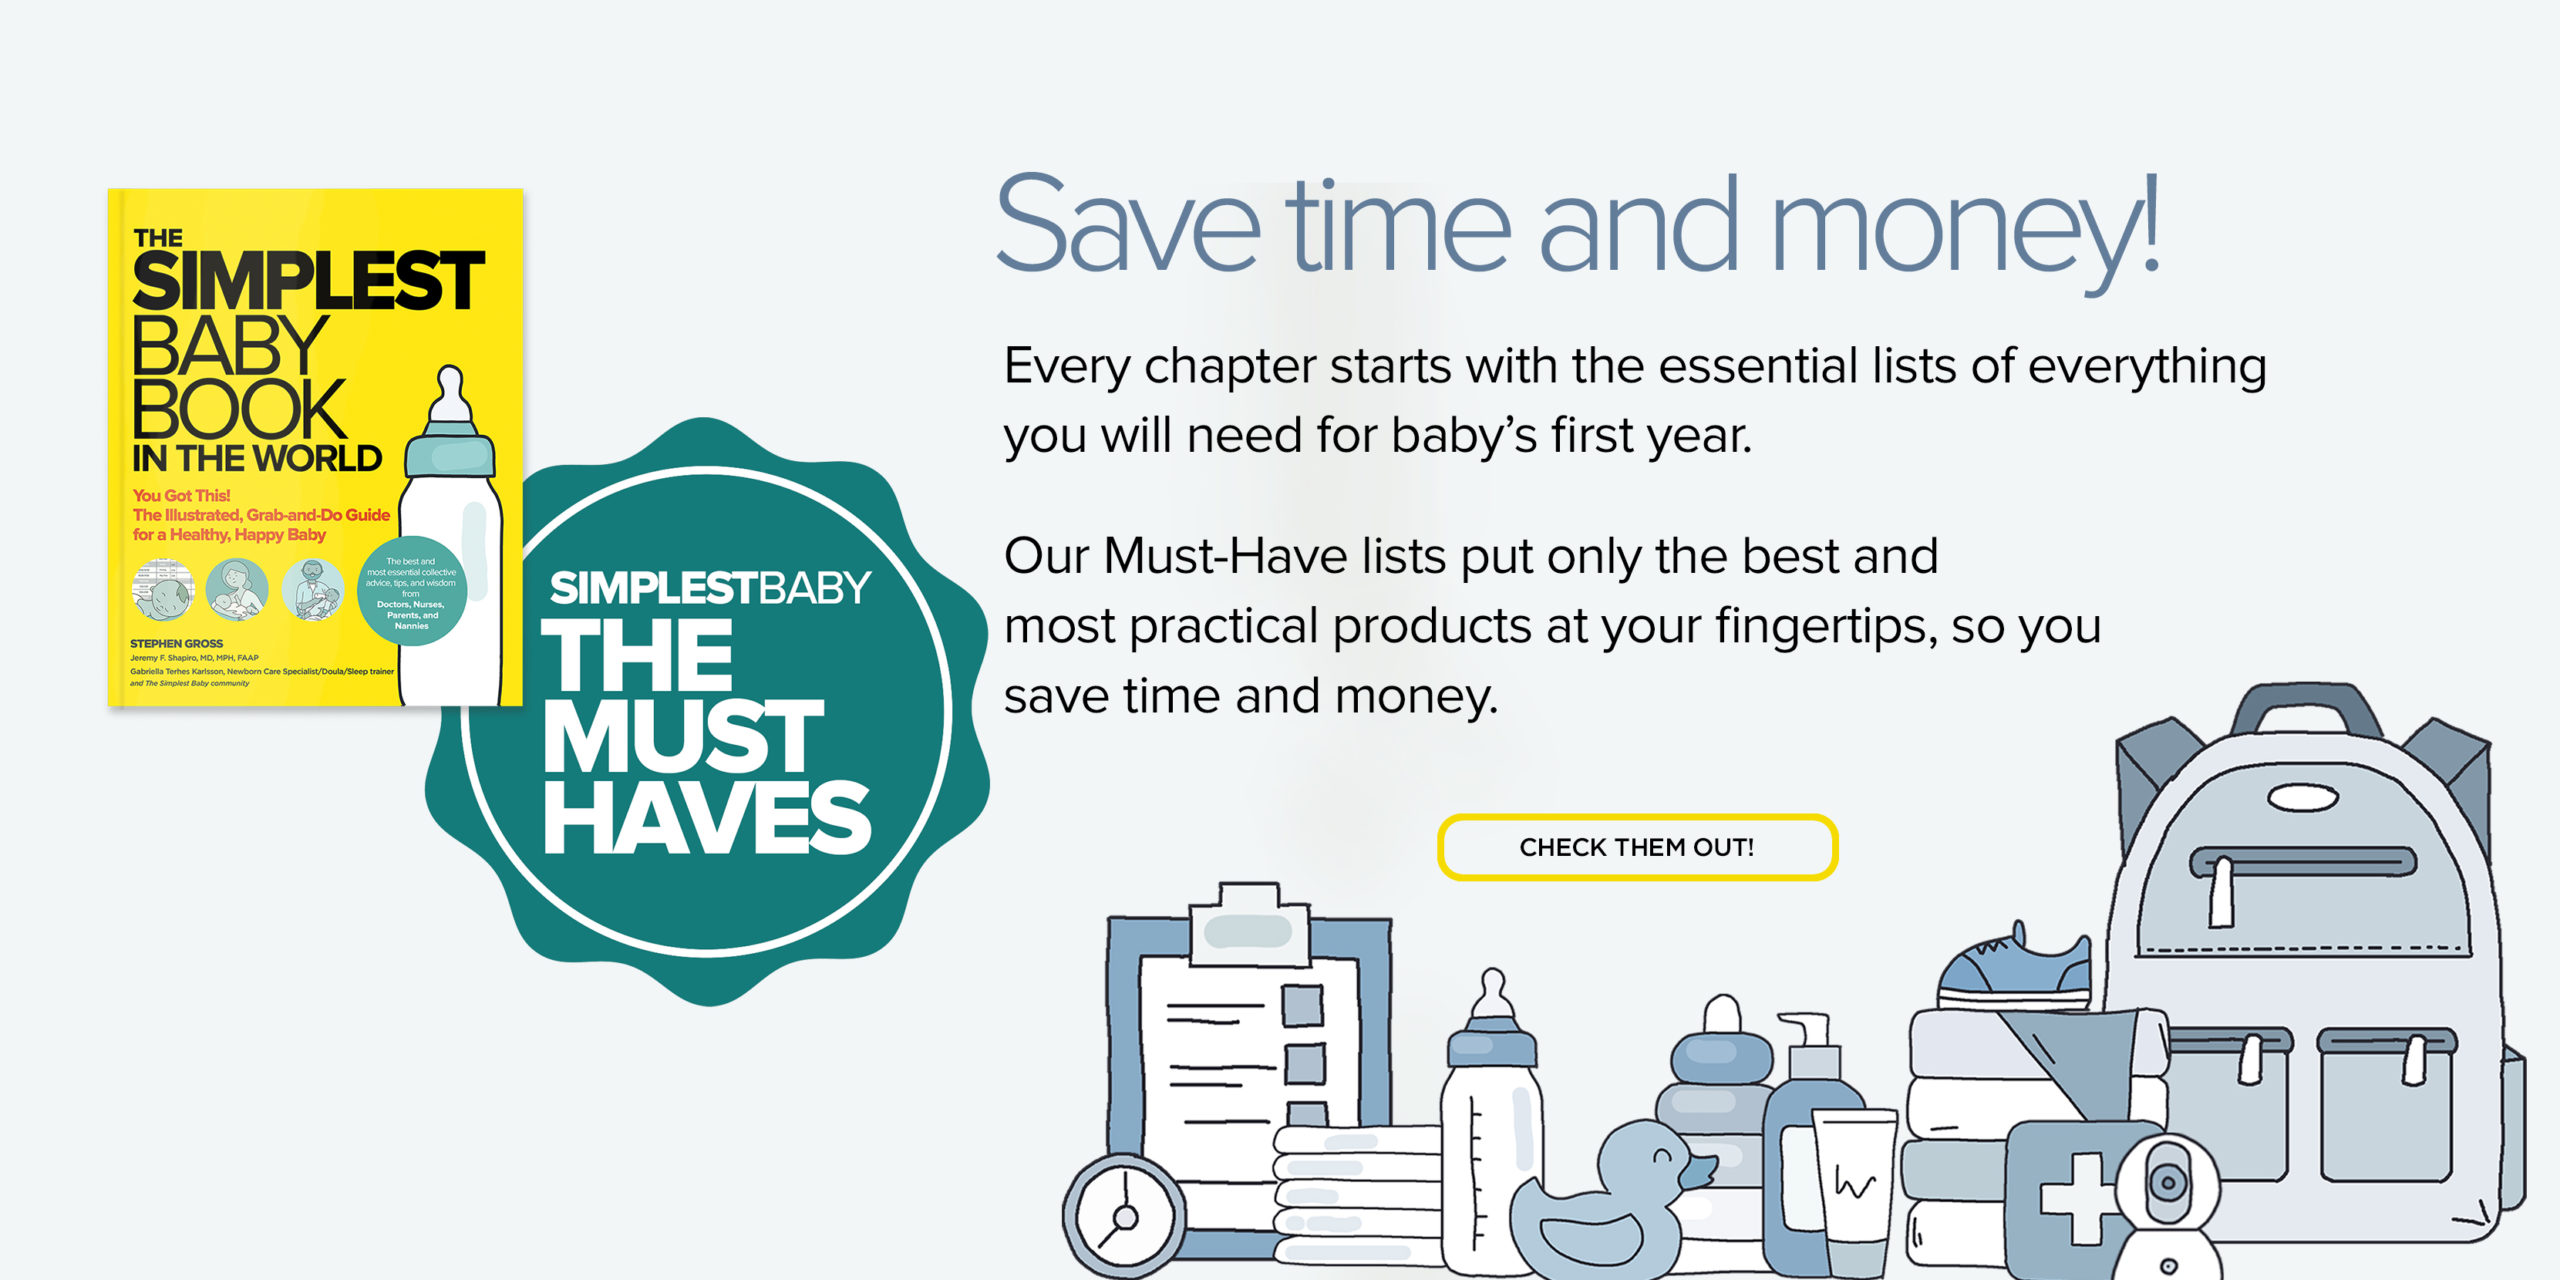 Save time and money: Every chapter starts with the essential lists of everything you will need for baby's first year. Our Must-Have lists put only the best and most practical products at your fingertips, so you save time and money.